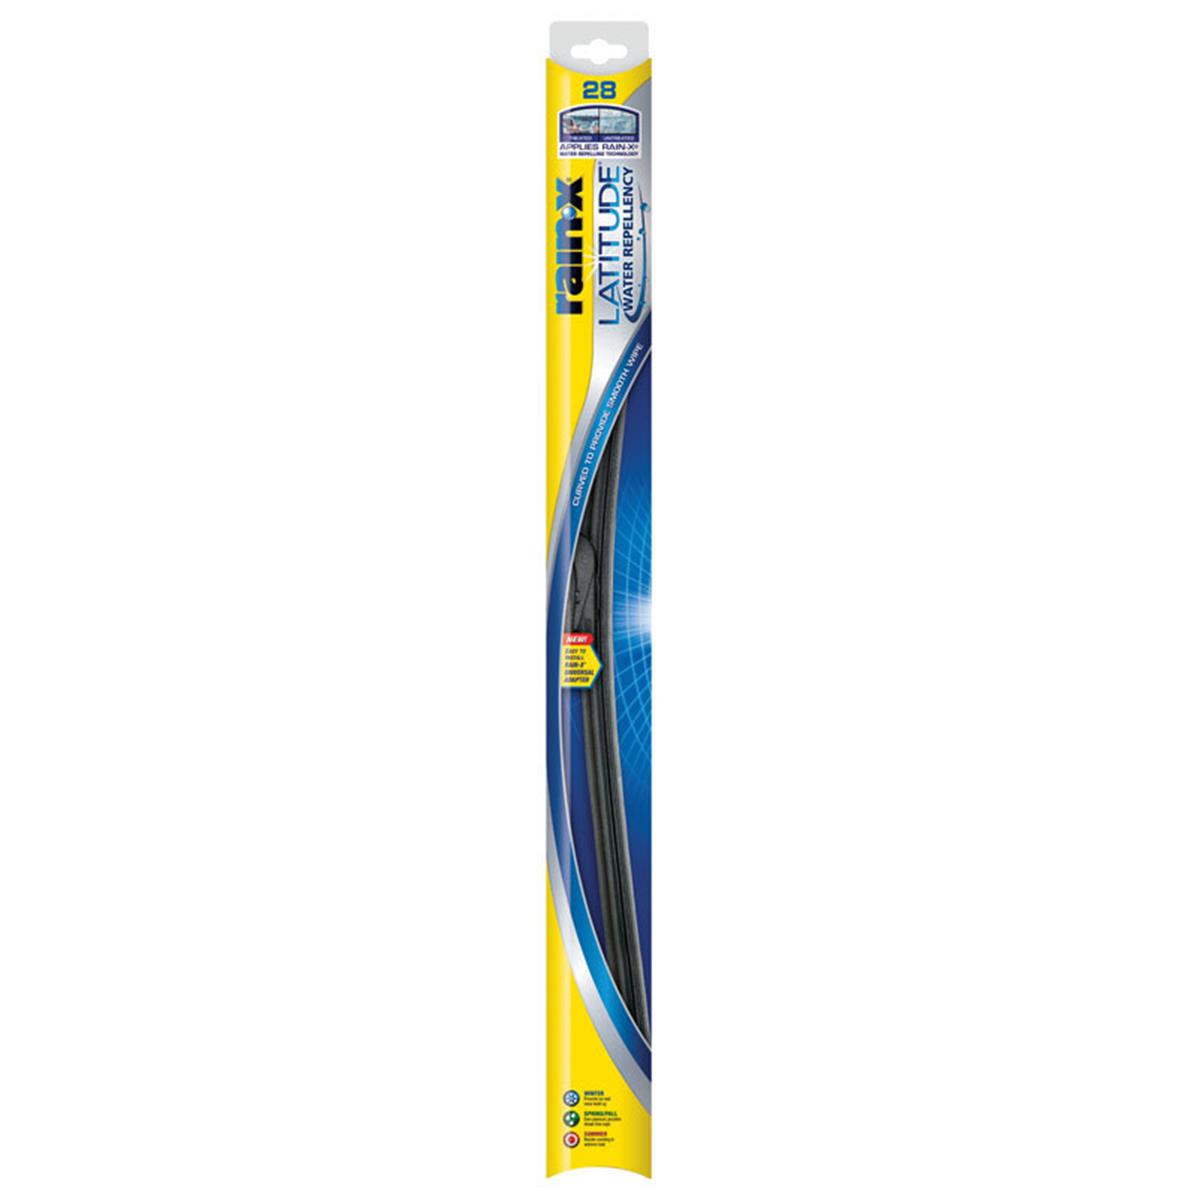 Picture of Itw Global Brands 5079282-2 28 in. Rain-X Latitude Wiper Blade